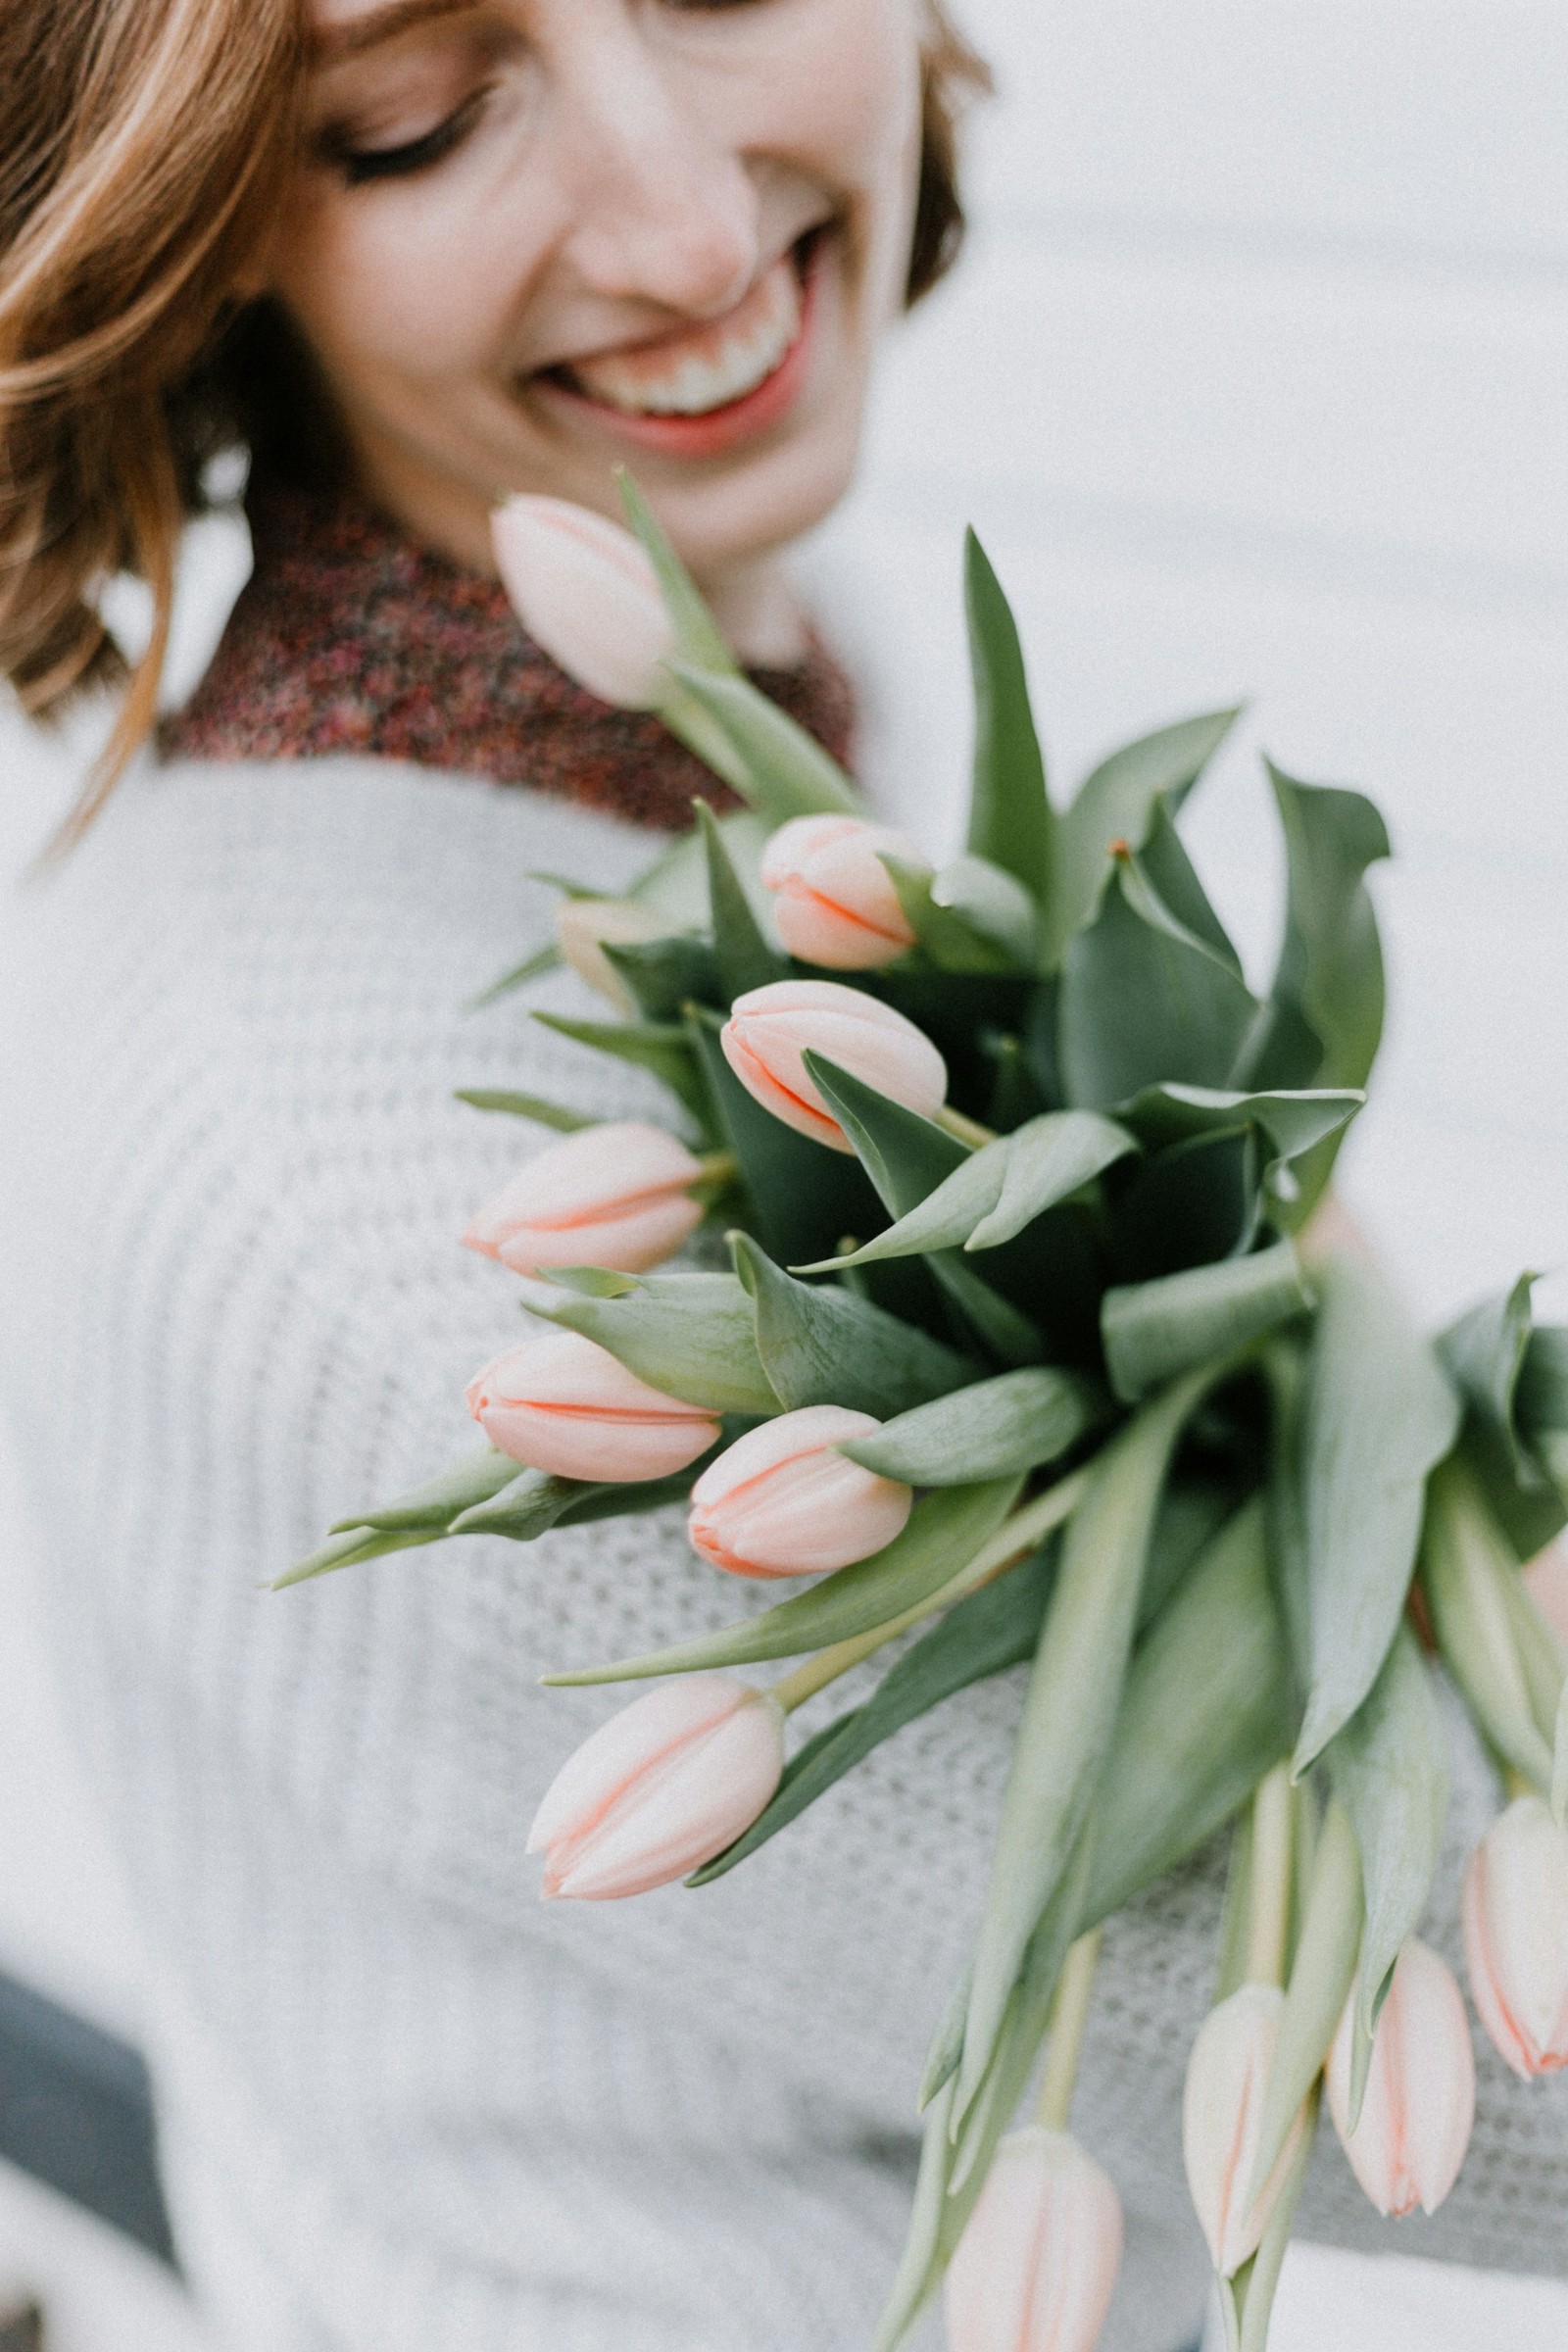 A woman holding tulips.